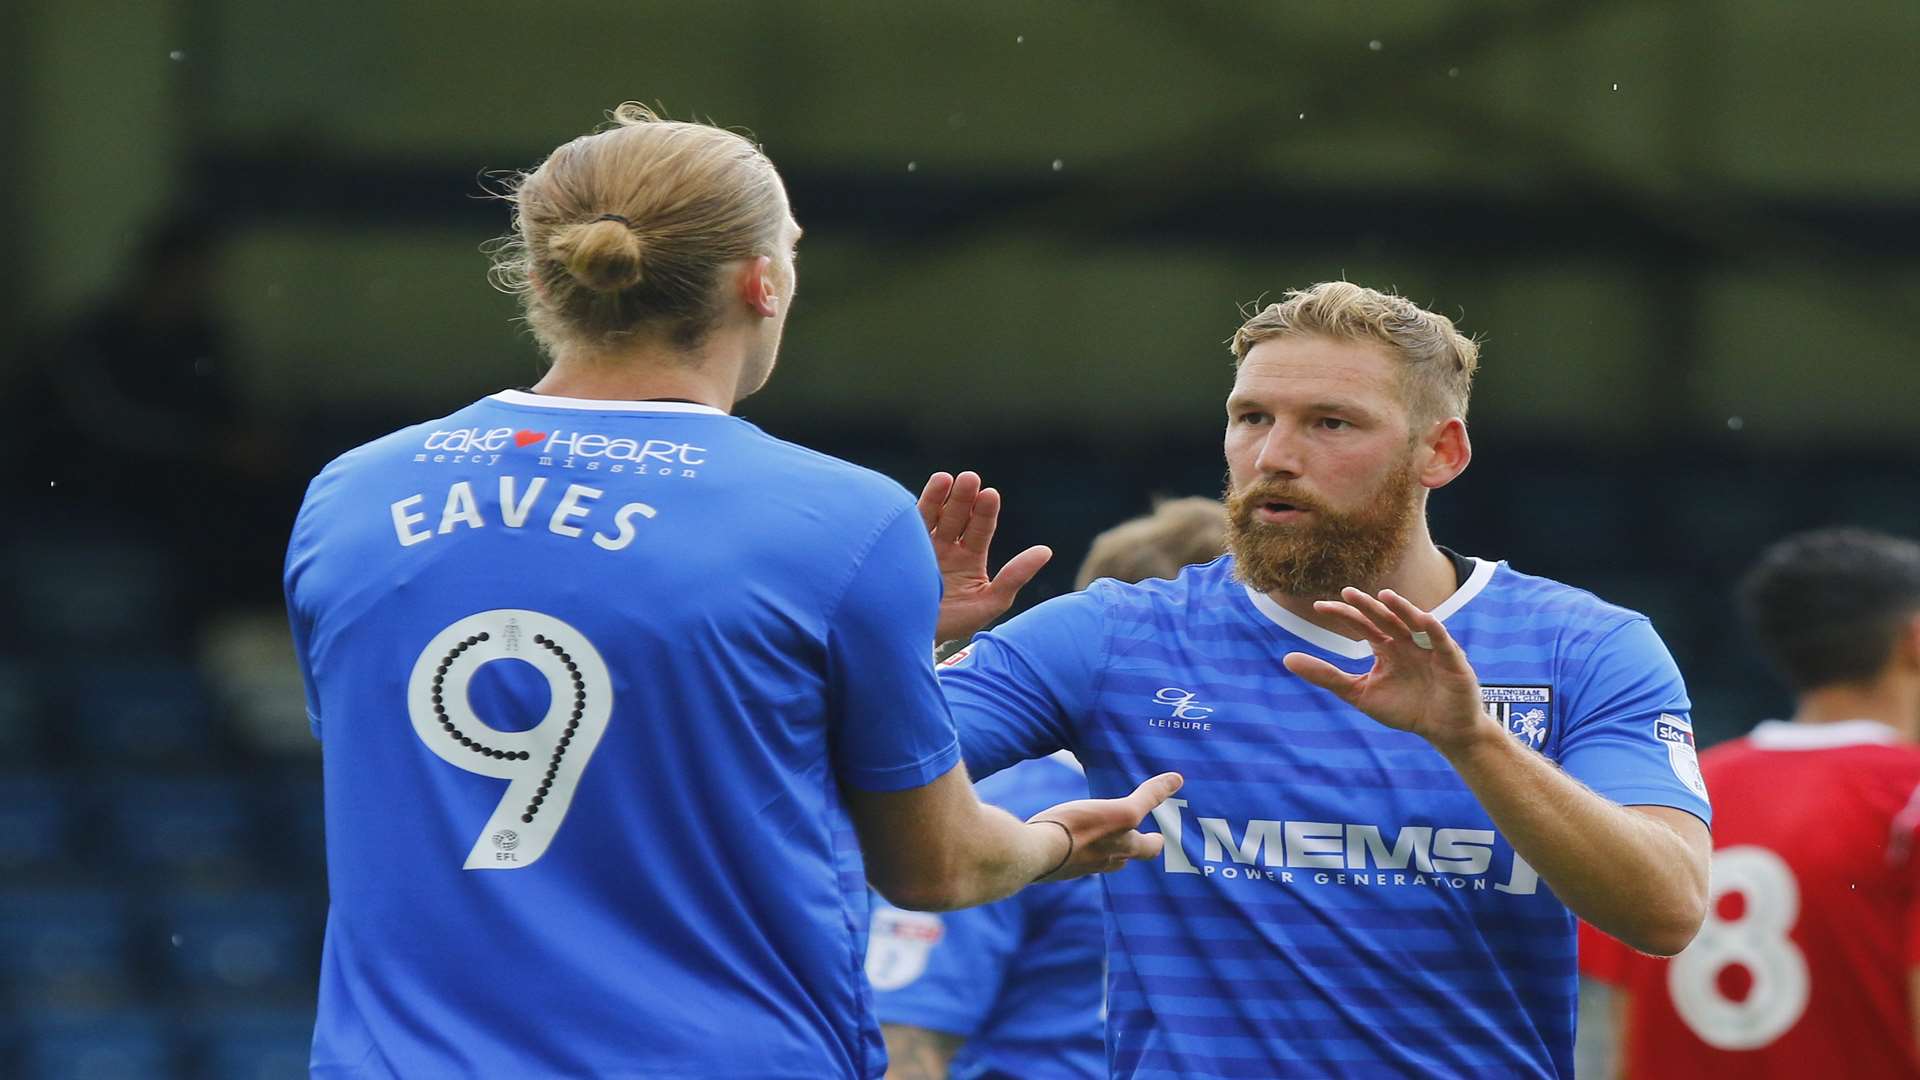 Scott Wagstaff congratulates Tom Eaves on his goal Picture: Andy Jones